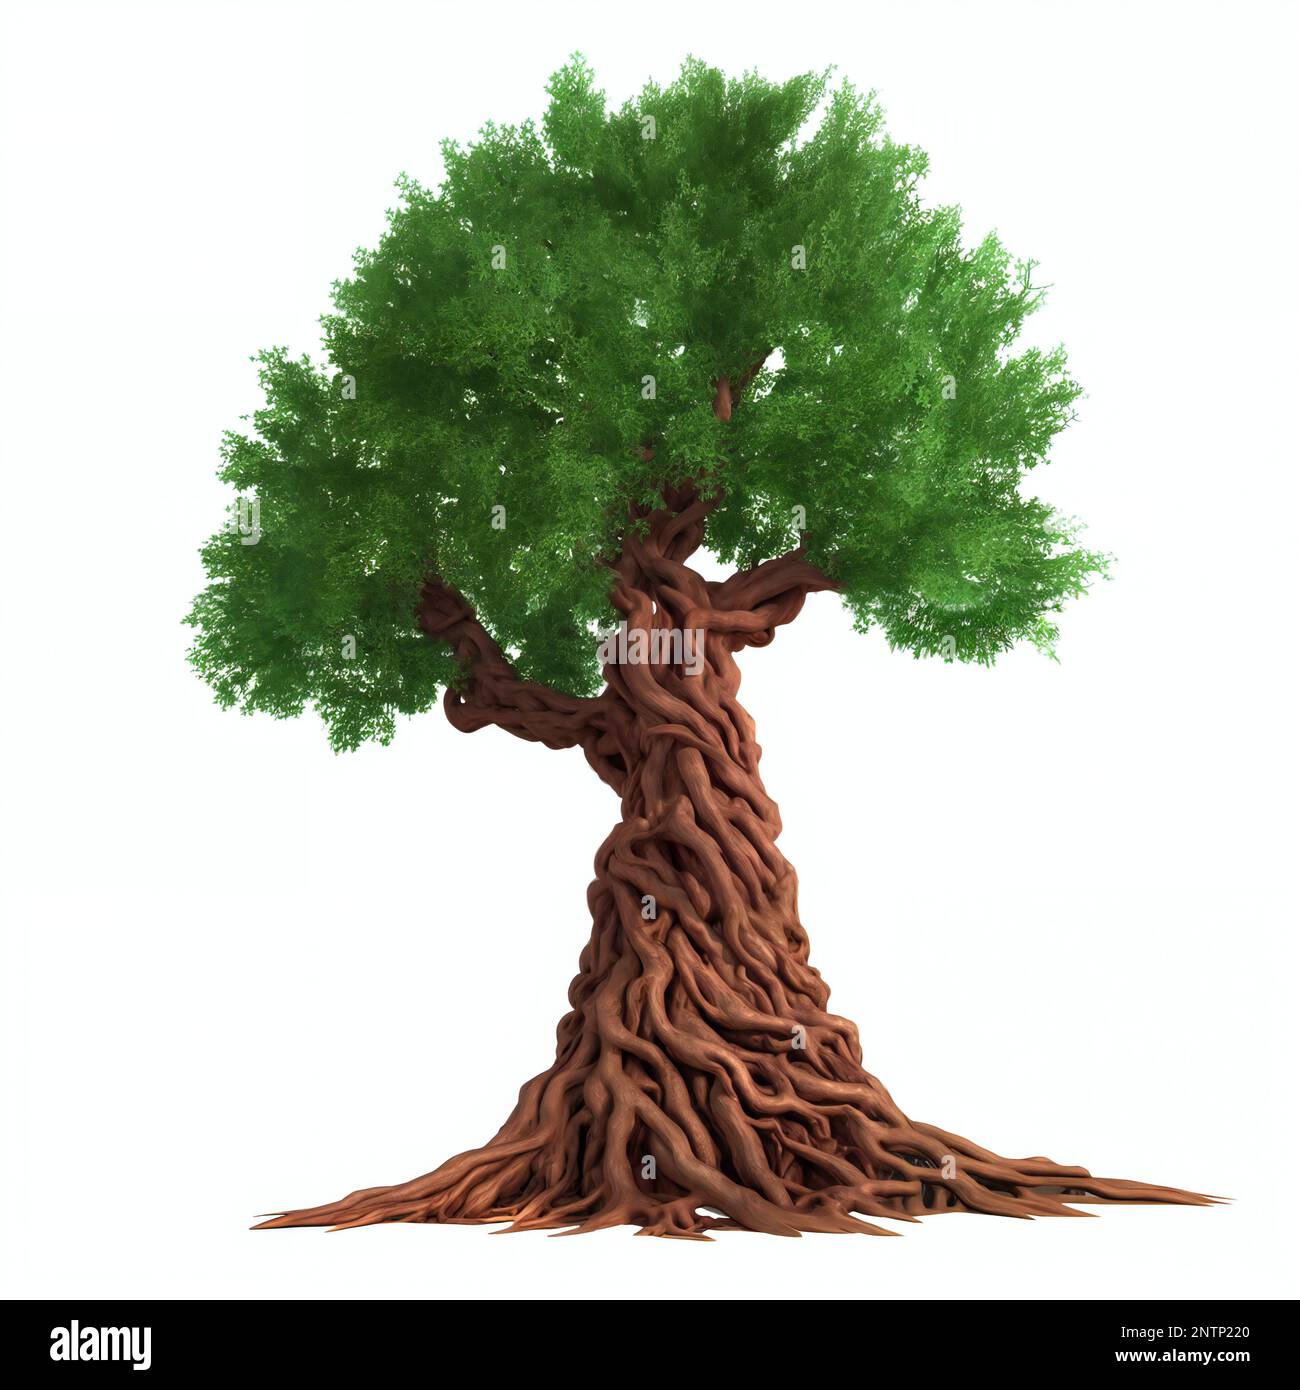 majestic tree, large plant with roots and foliage, isolated on white background Stock Photo